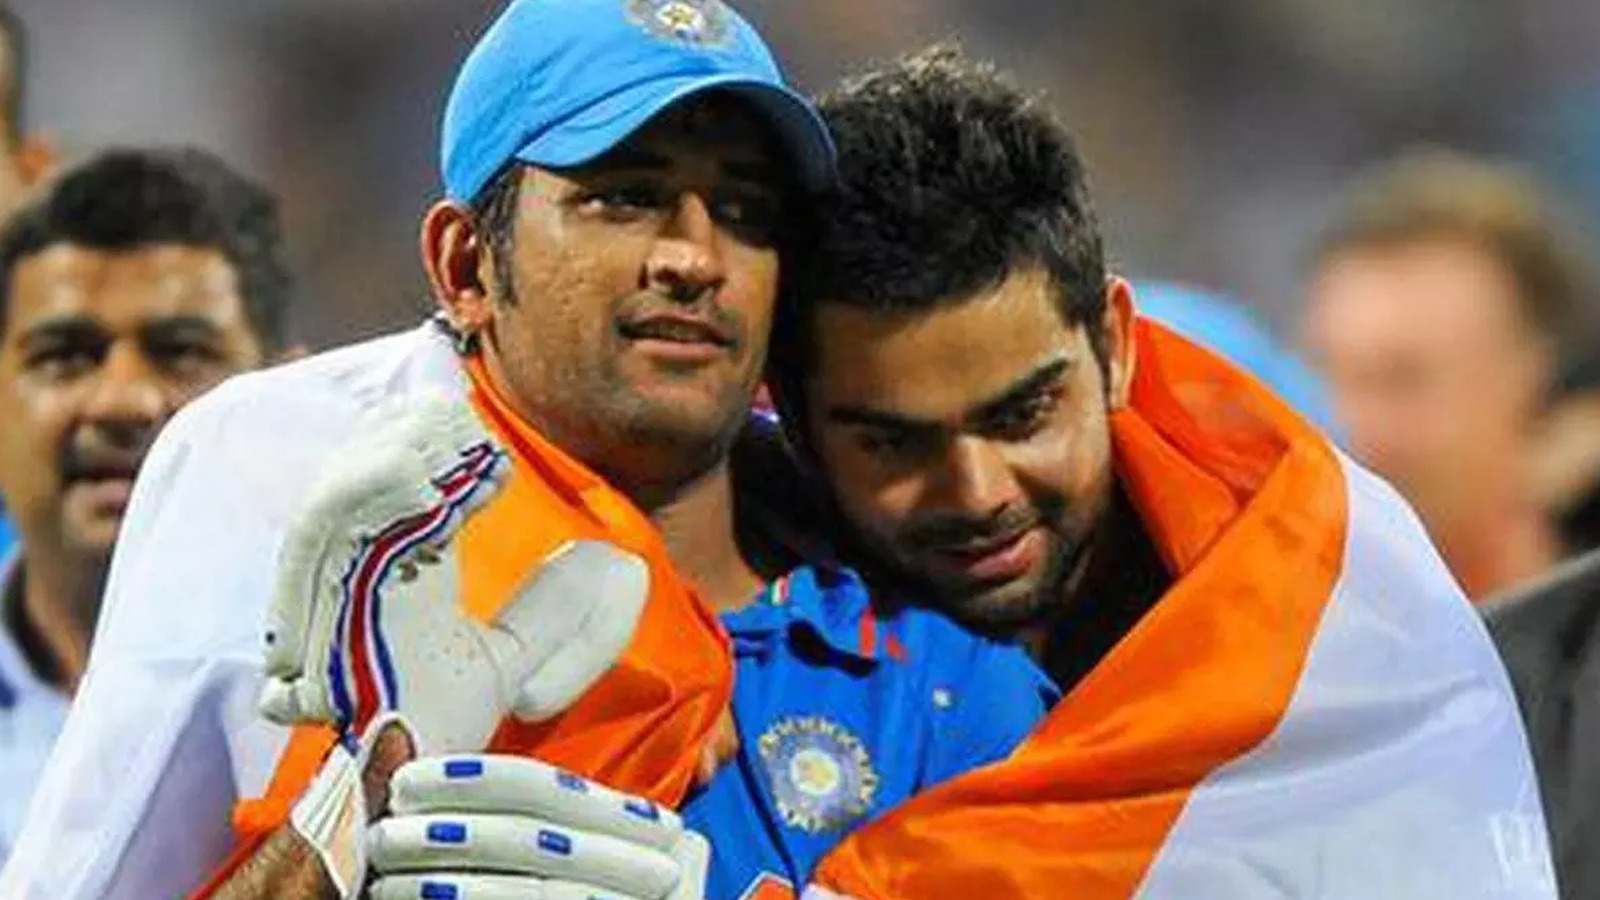 Virat and Dhoni | image: Gettyimages